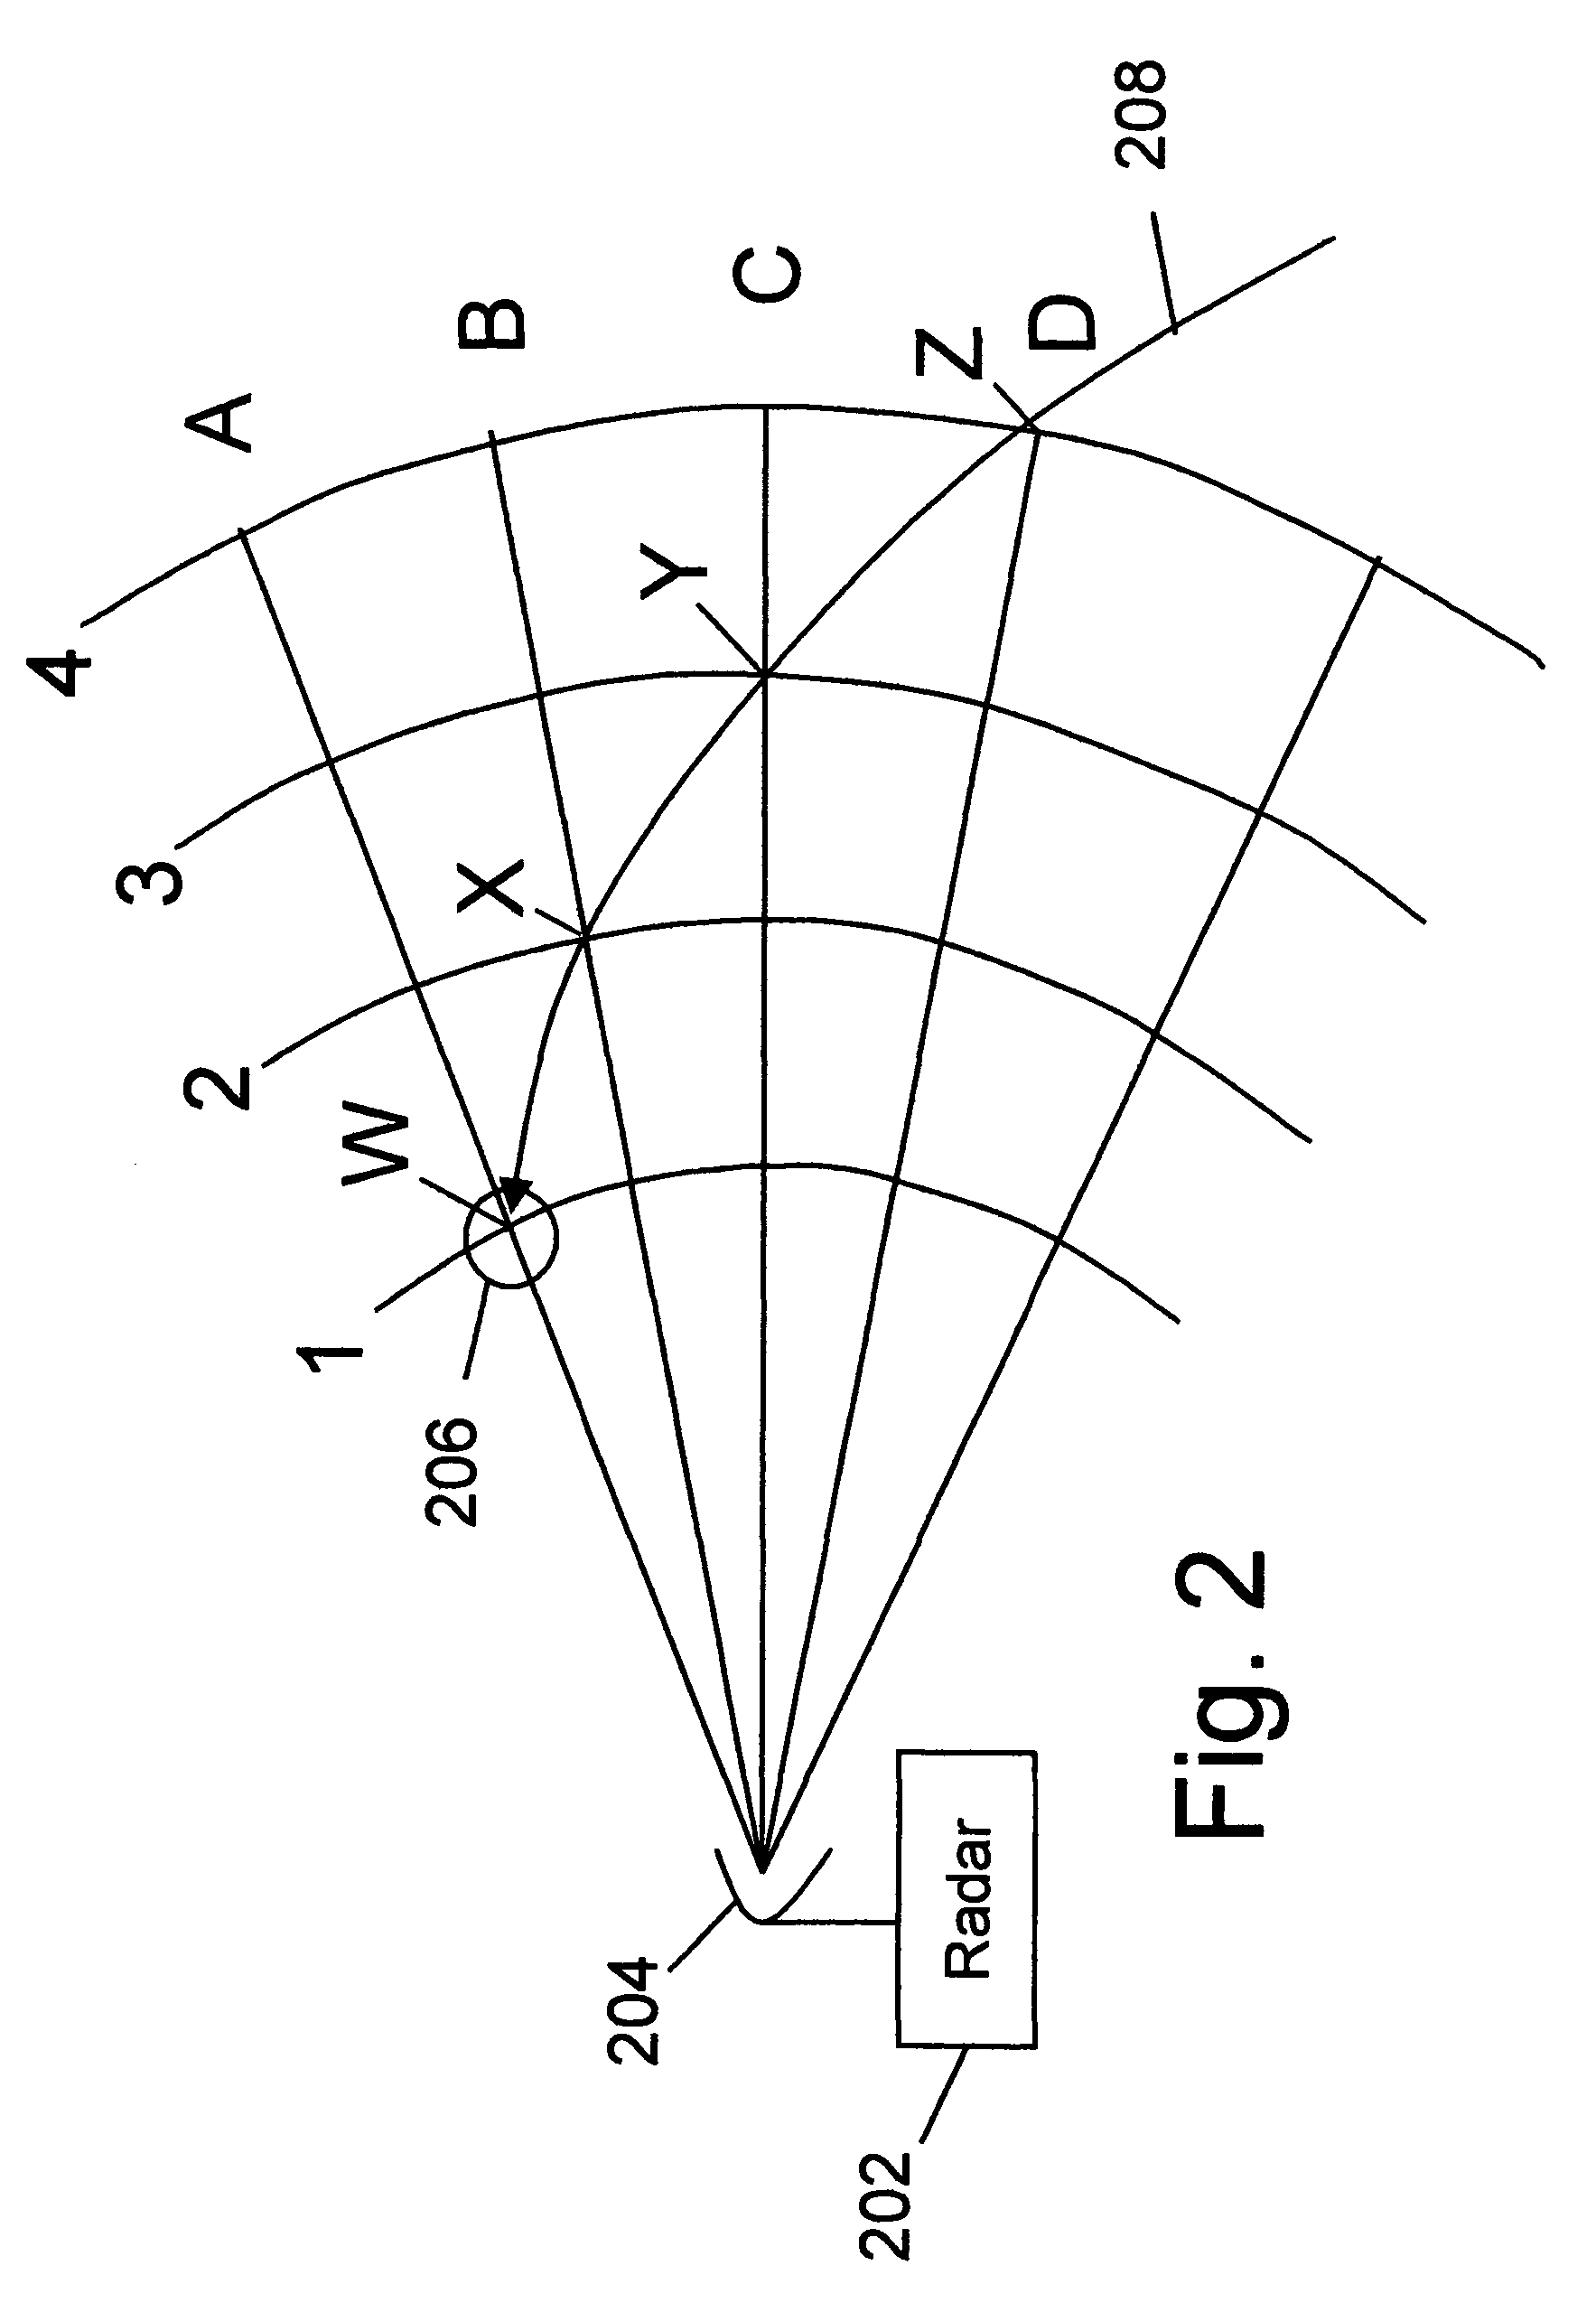 Apparatus and method for detecting moving objects